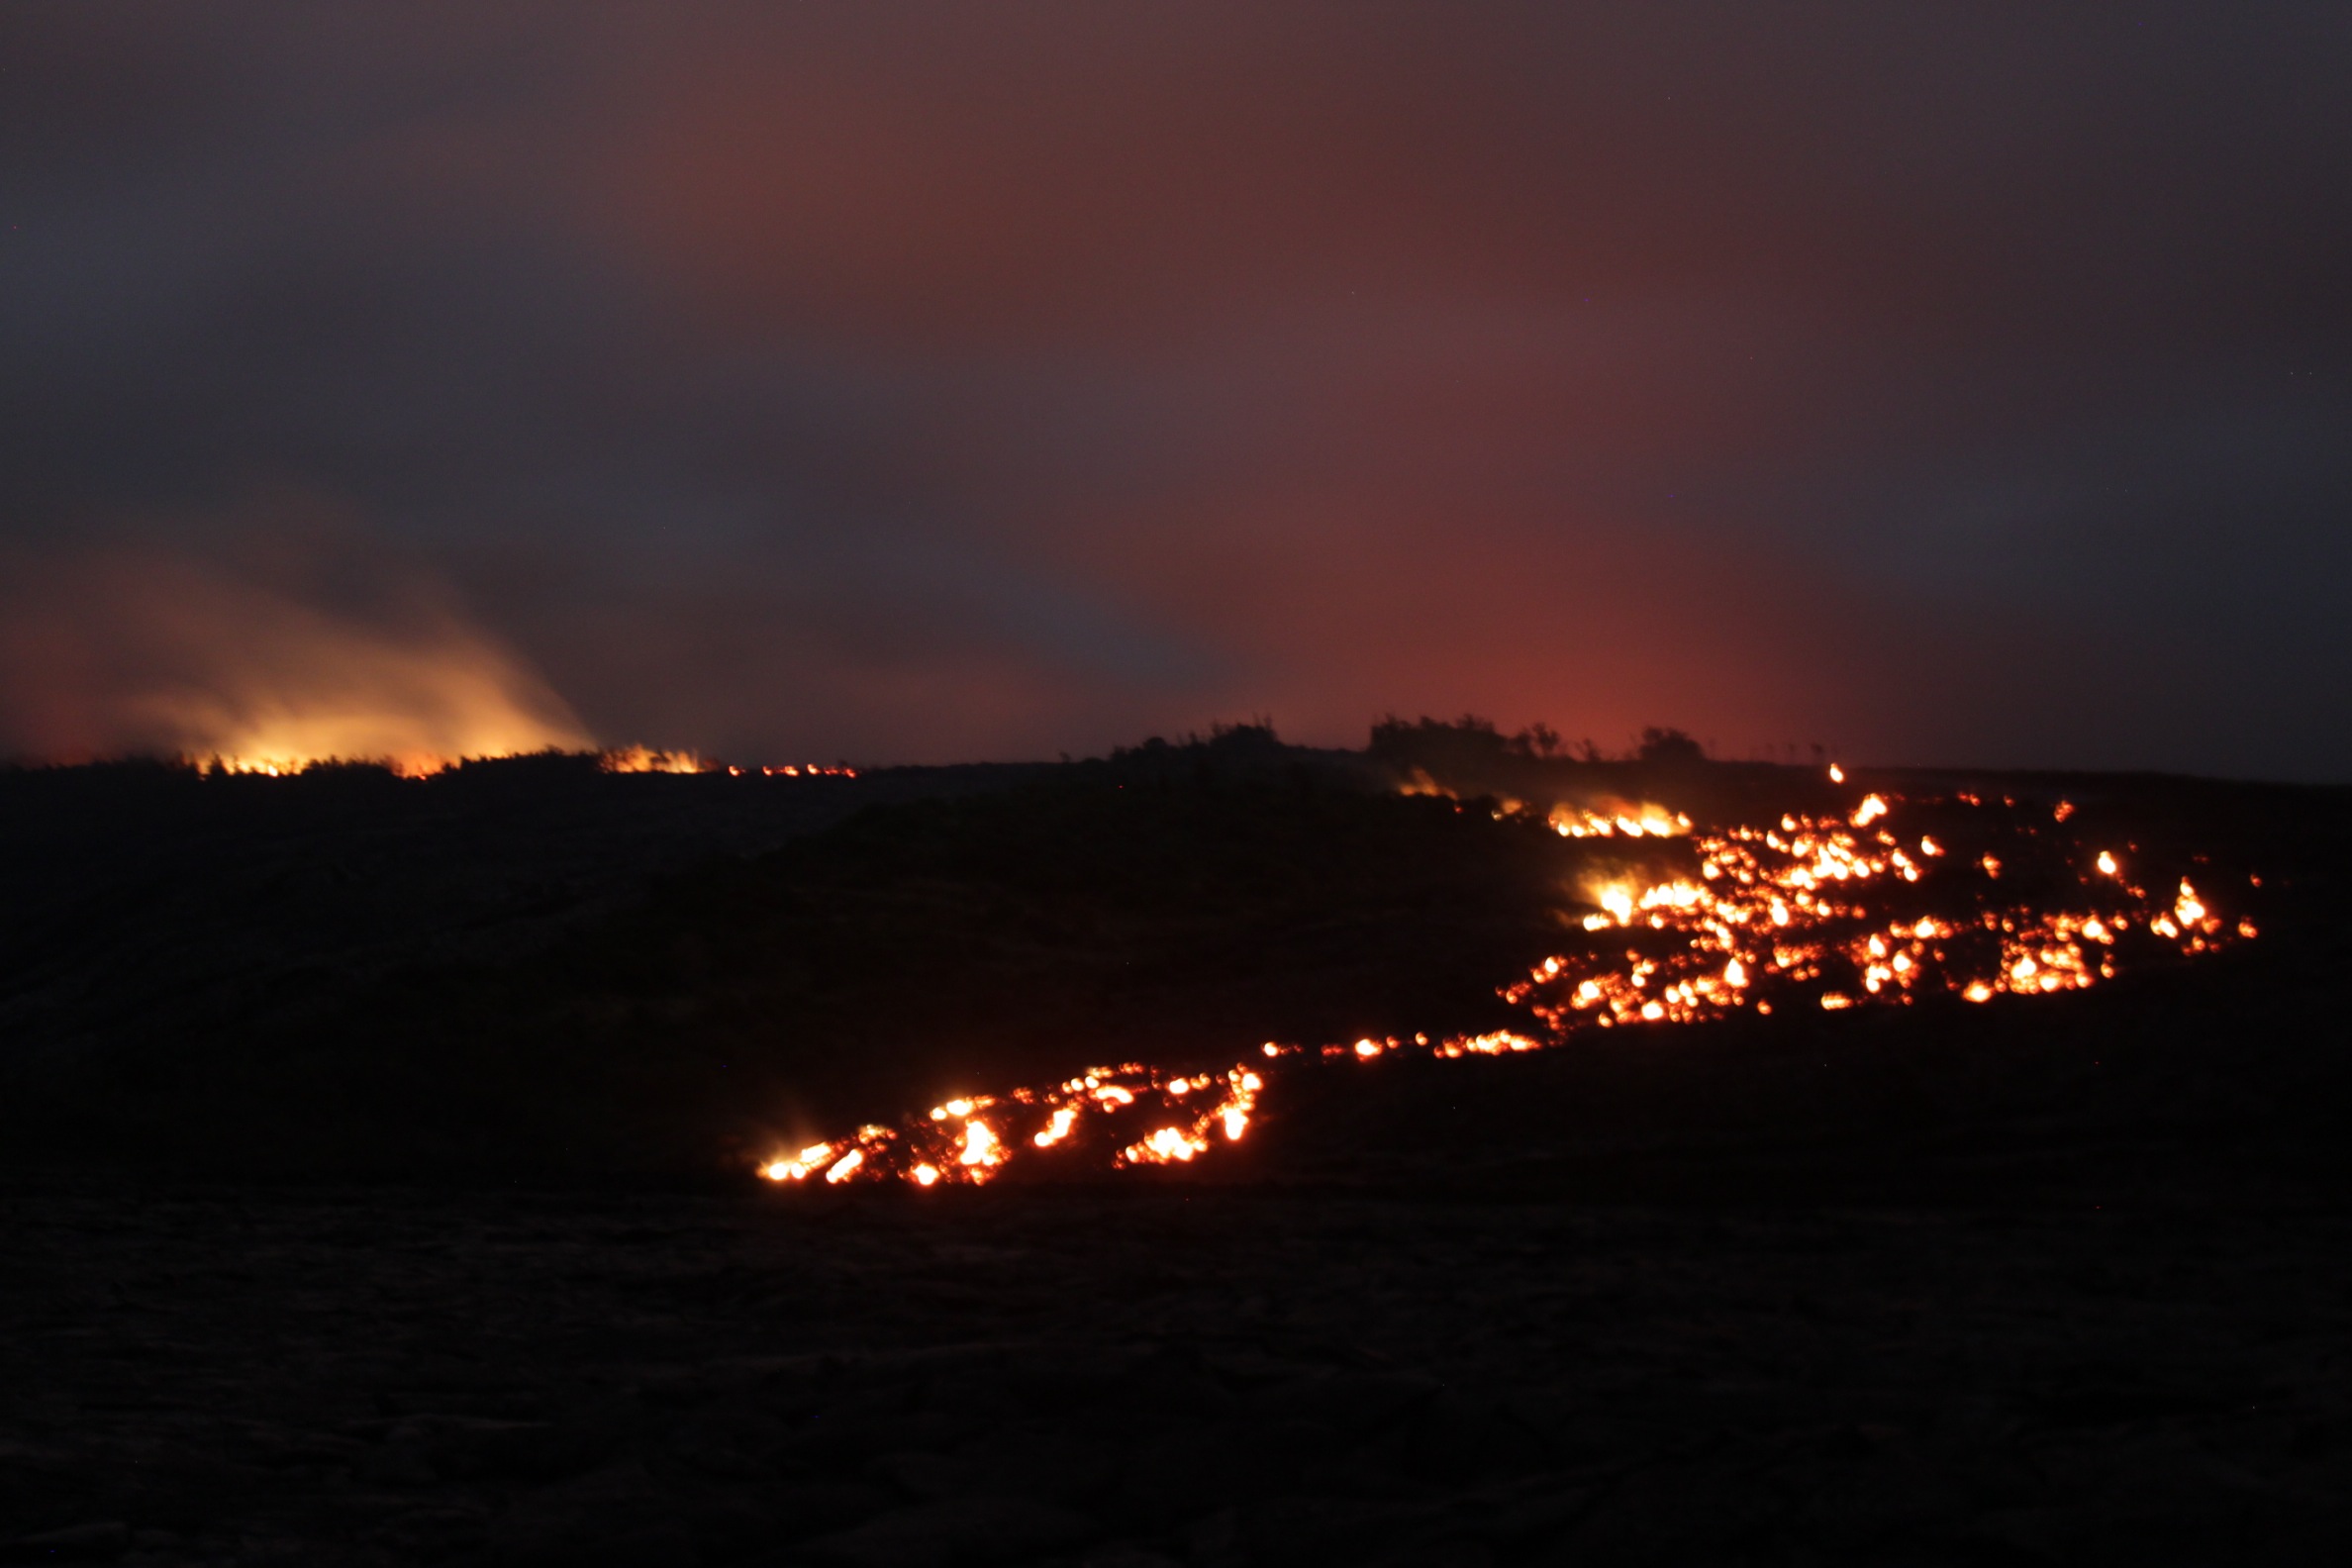 The eastern lava flow branch in the foreground, with the western branch visible cresting the hill in the background and illuminating the smoke from burning trees.